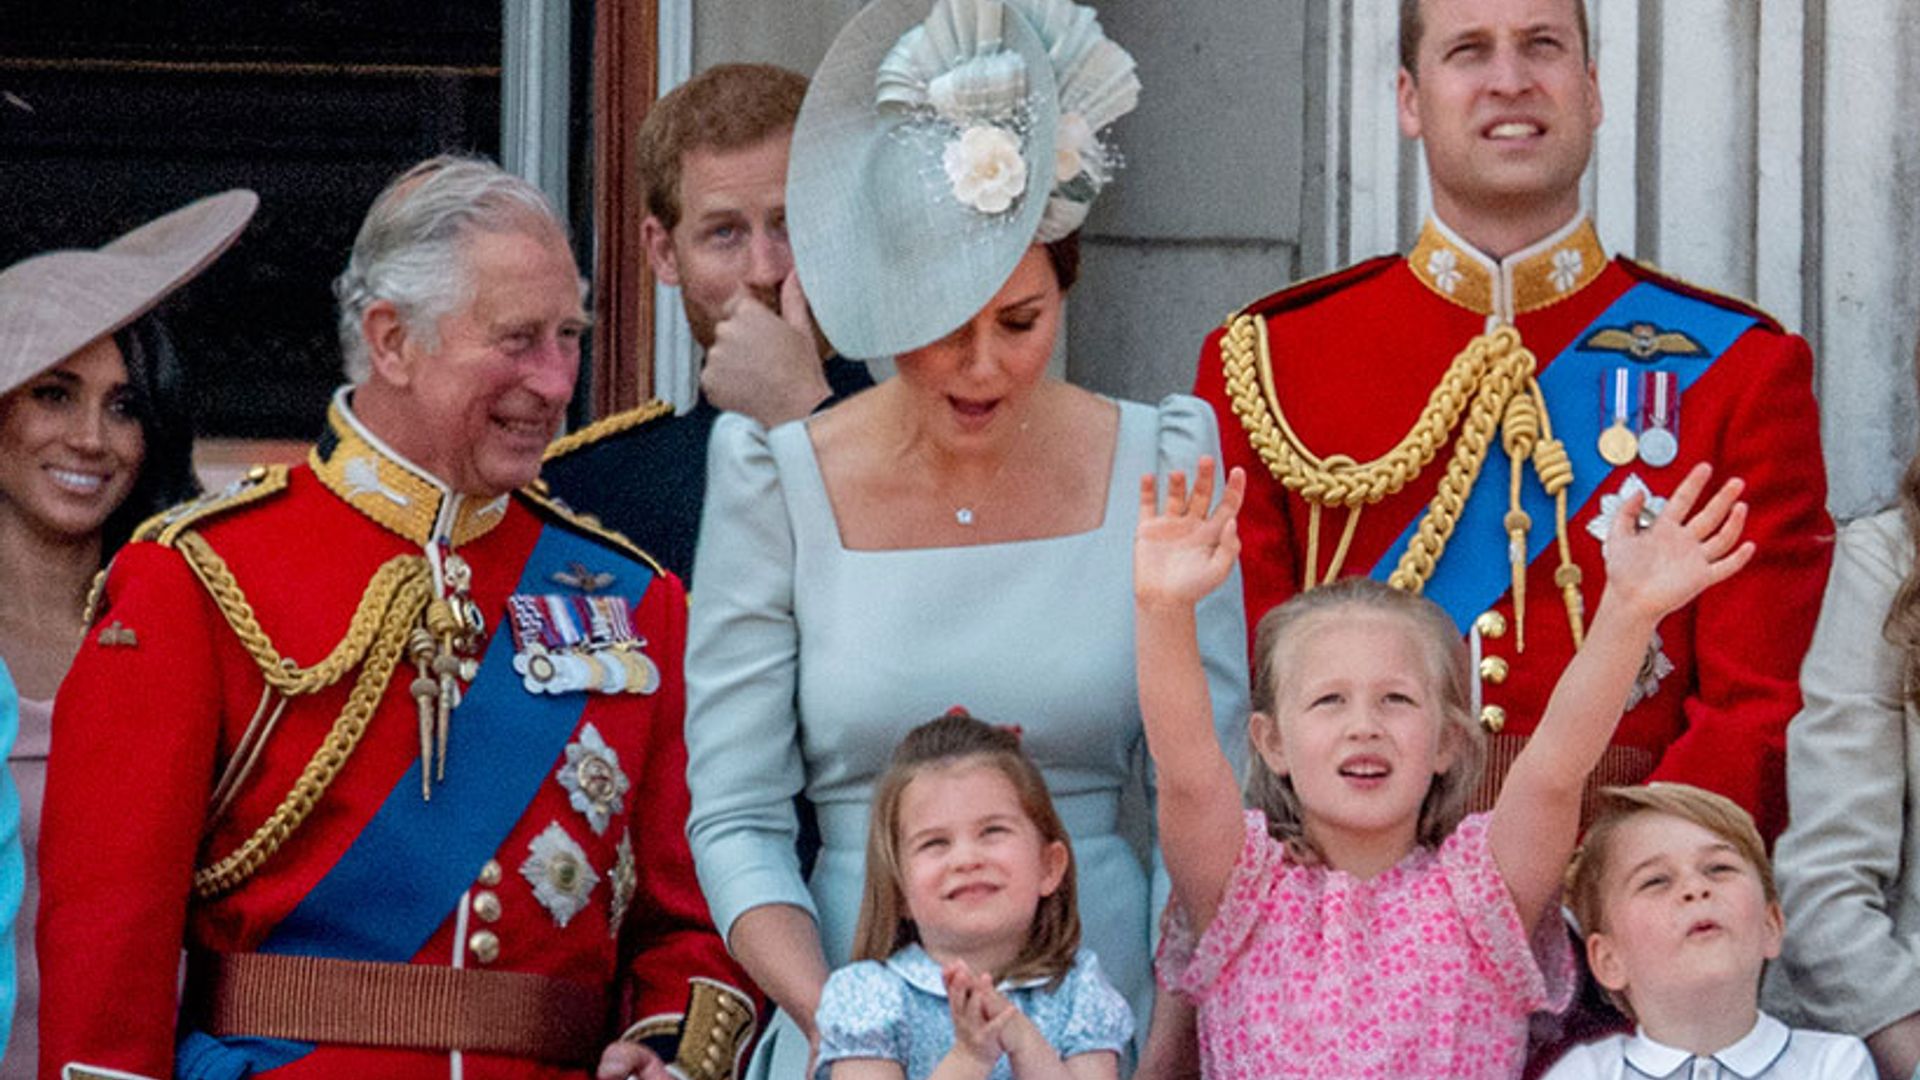 Prince Charles grandchildren trooping the colour